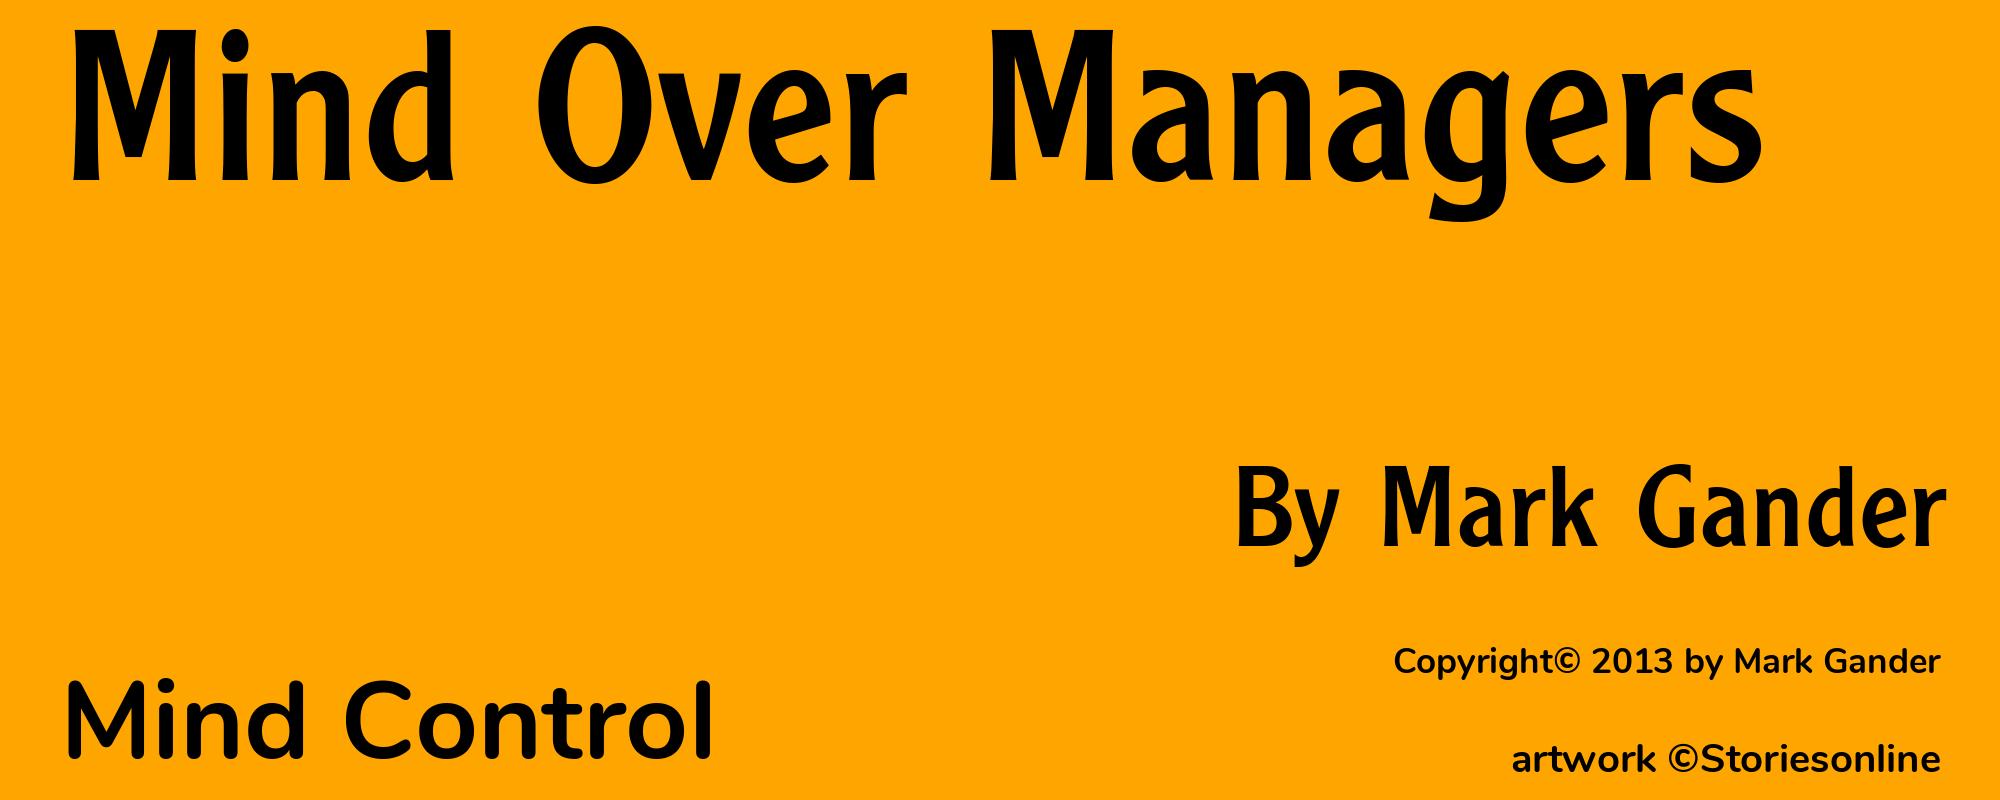 Mind Over Managers - Cover